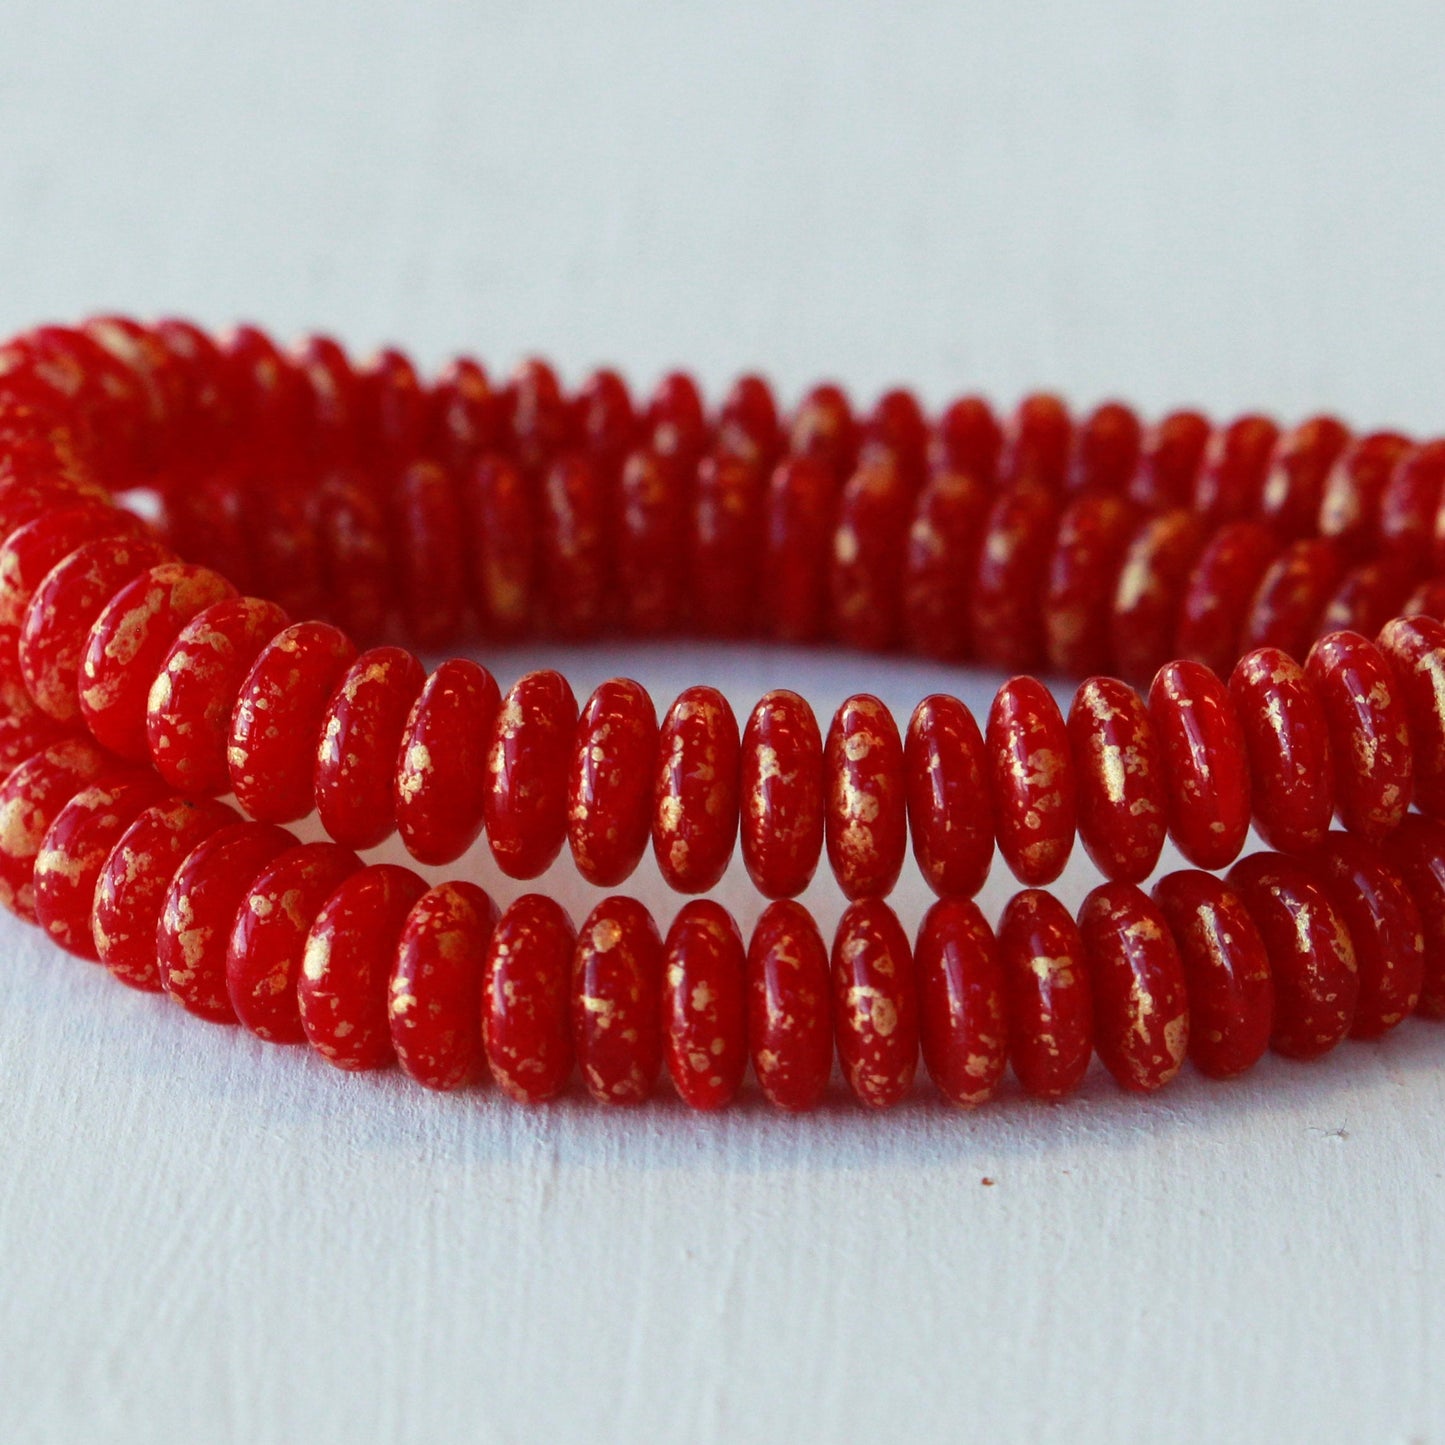 6mm Rondelle Beads - Red With Gold Dust - 50 Beads